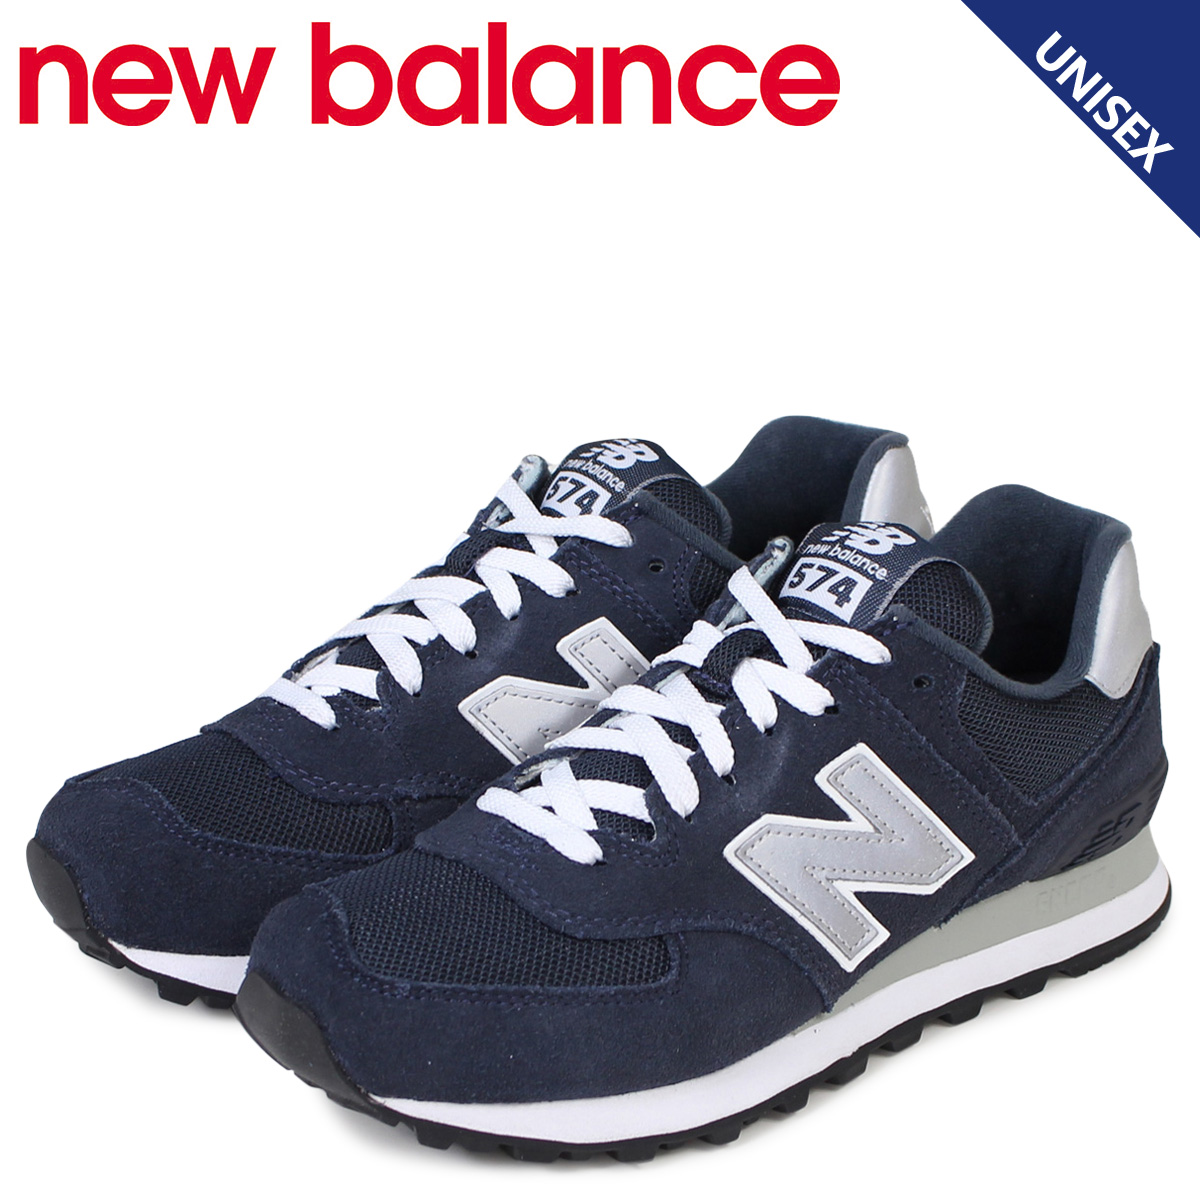 mens new balance sneakers on sale